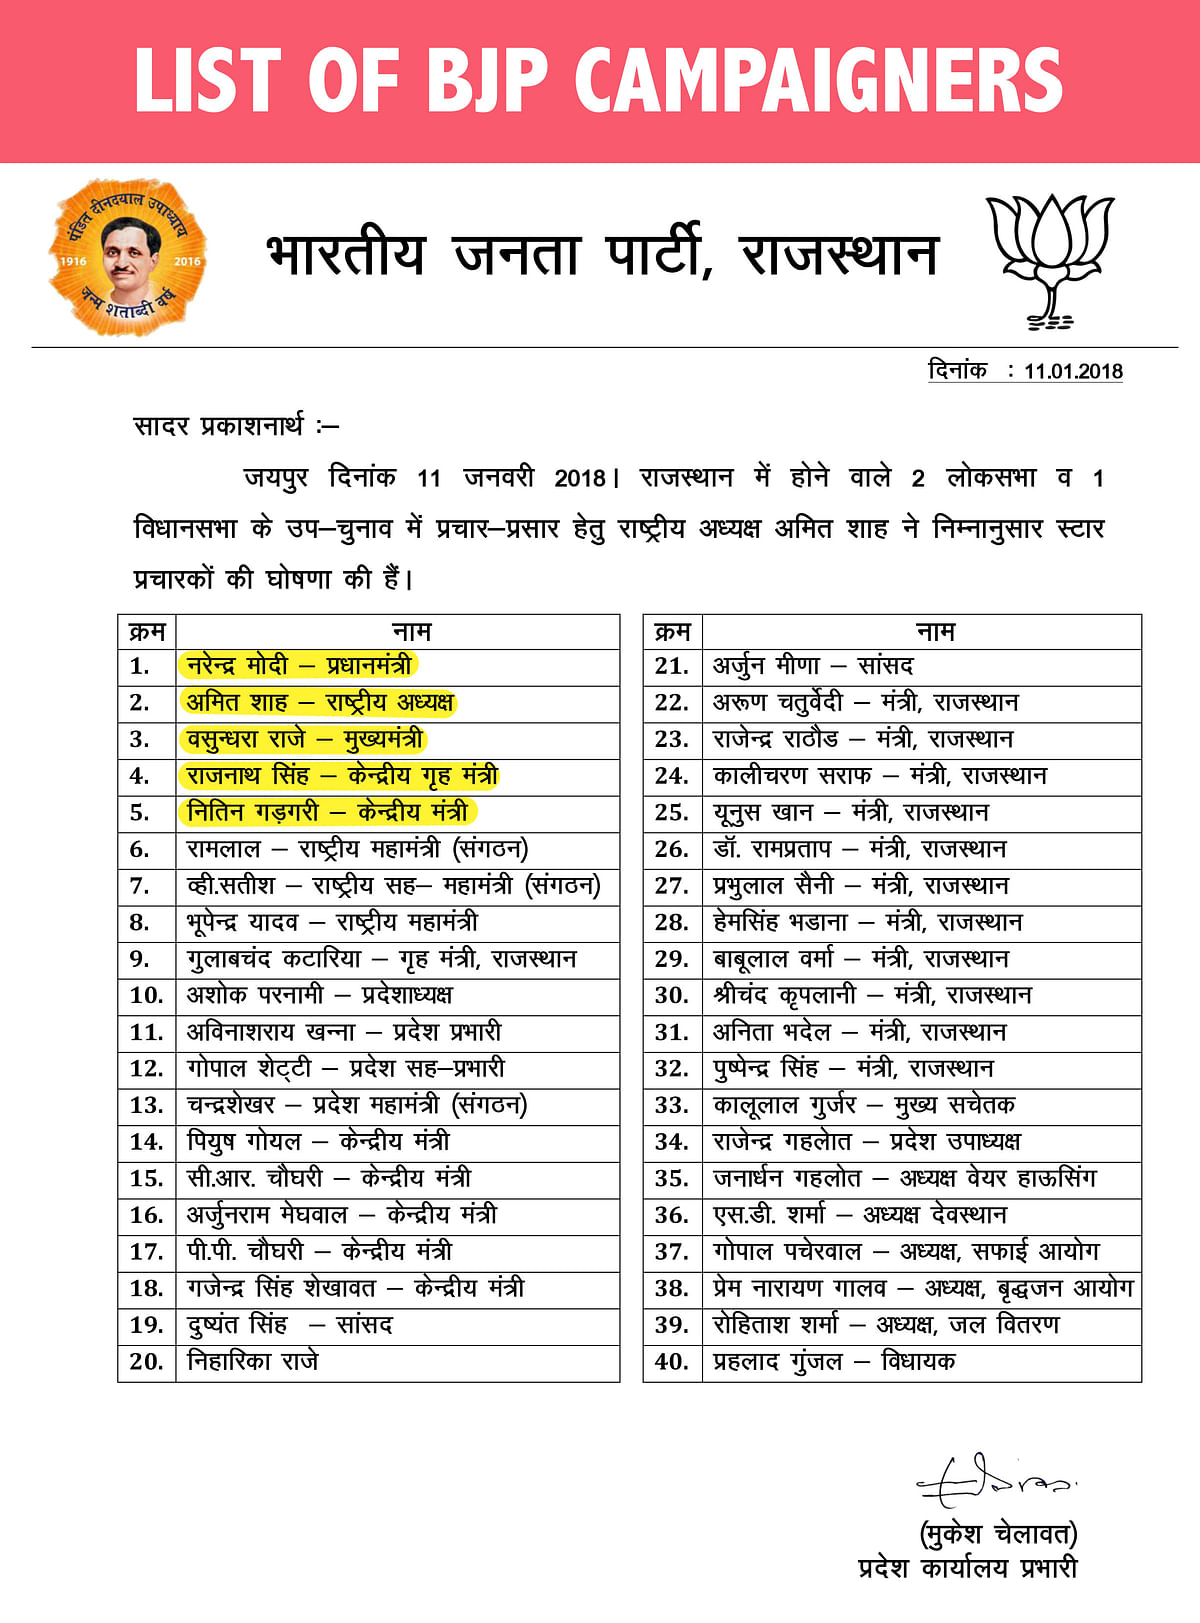 While Congress’ campaign list  has state leaders like Sachin Pilot, BJP’s list includes big names.